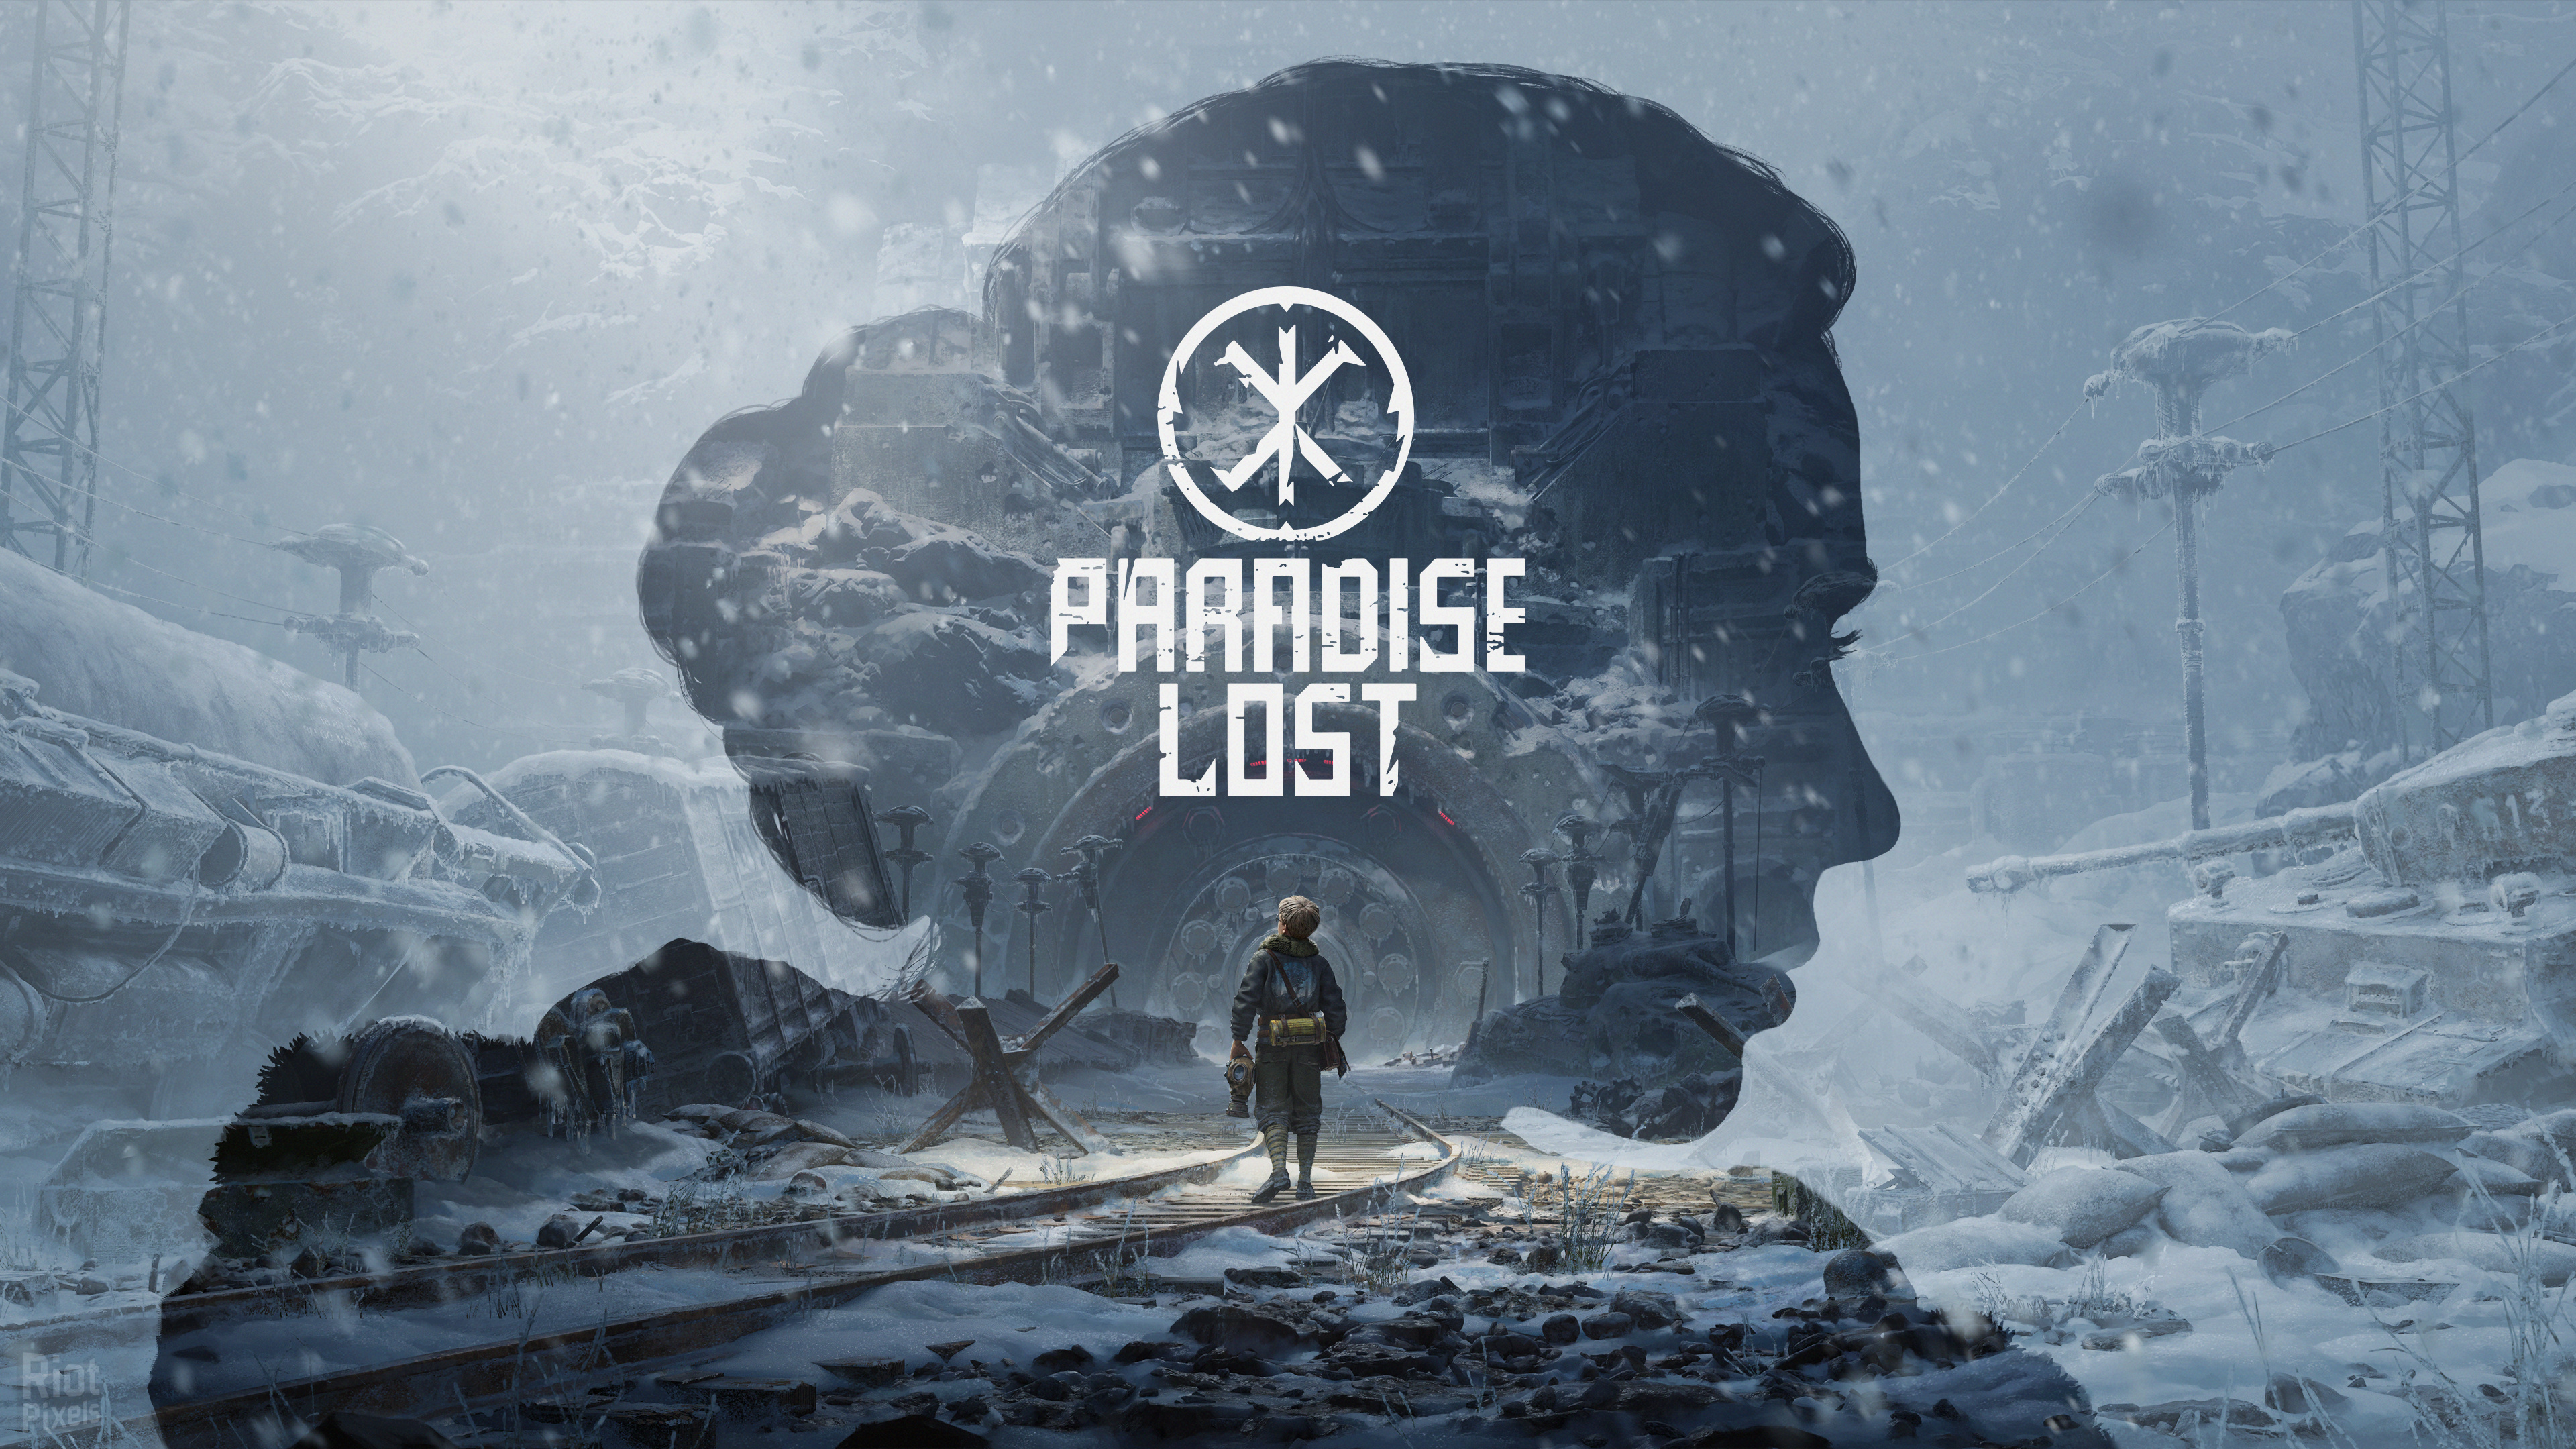 New Paradise Lost Game Wallpapers